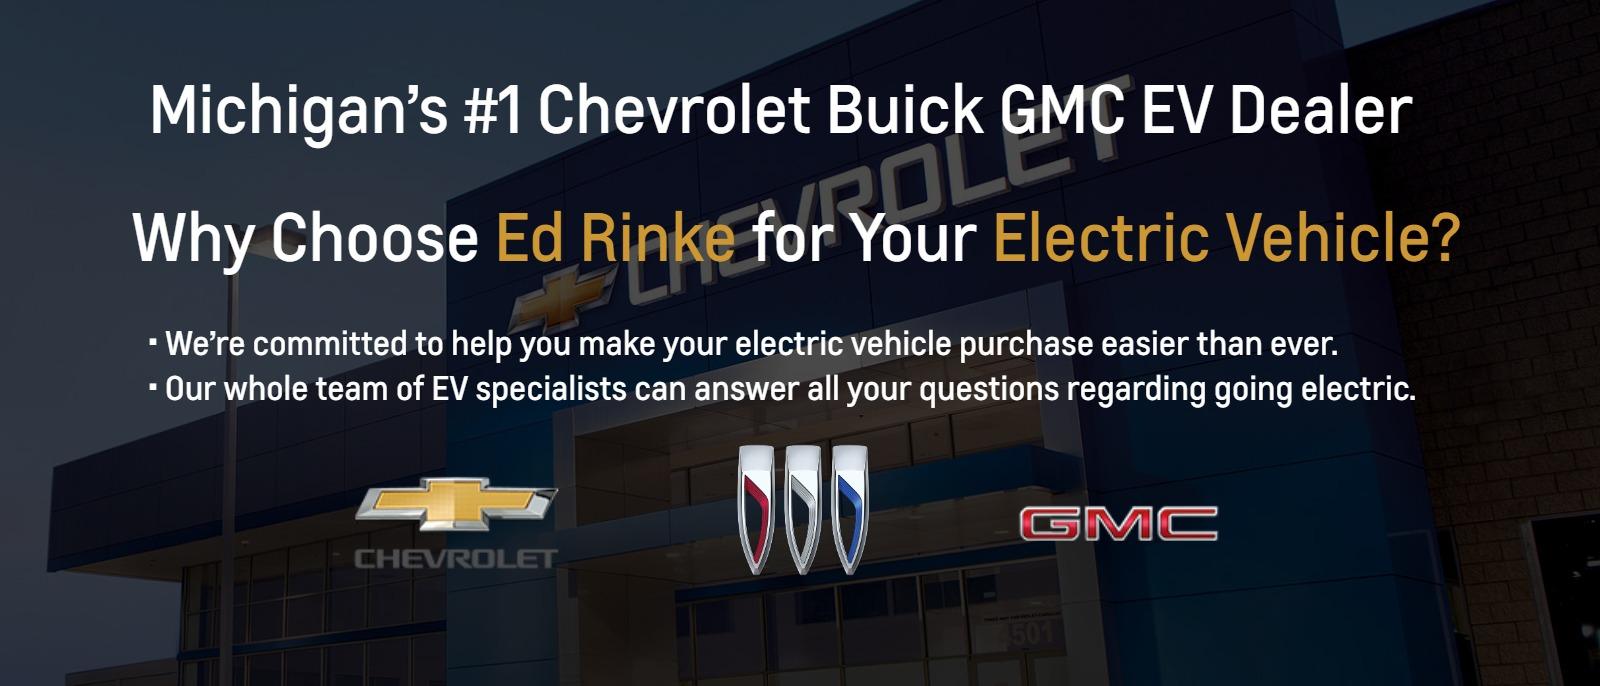 Michigan’s #1 Chevy EV Dealer
Why Choose Ed Rinke for Your Electric Vehicle?

• We’re committed to help you make your electric vehicle purchase easier than ever.
• Our whole team of EV specialists can answer all your questions regarding going electric